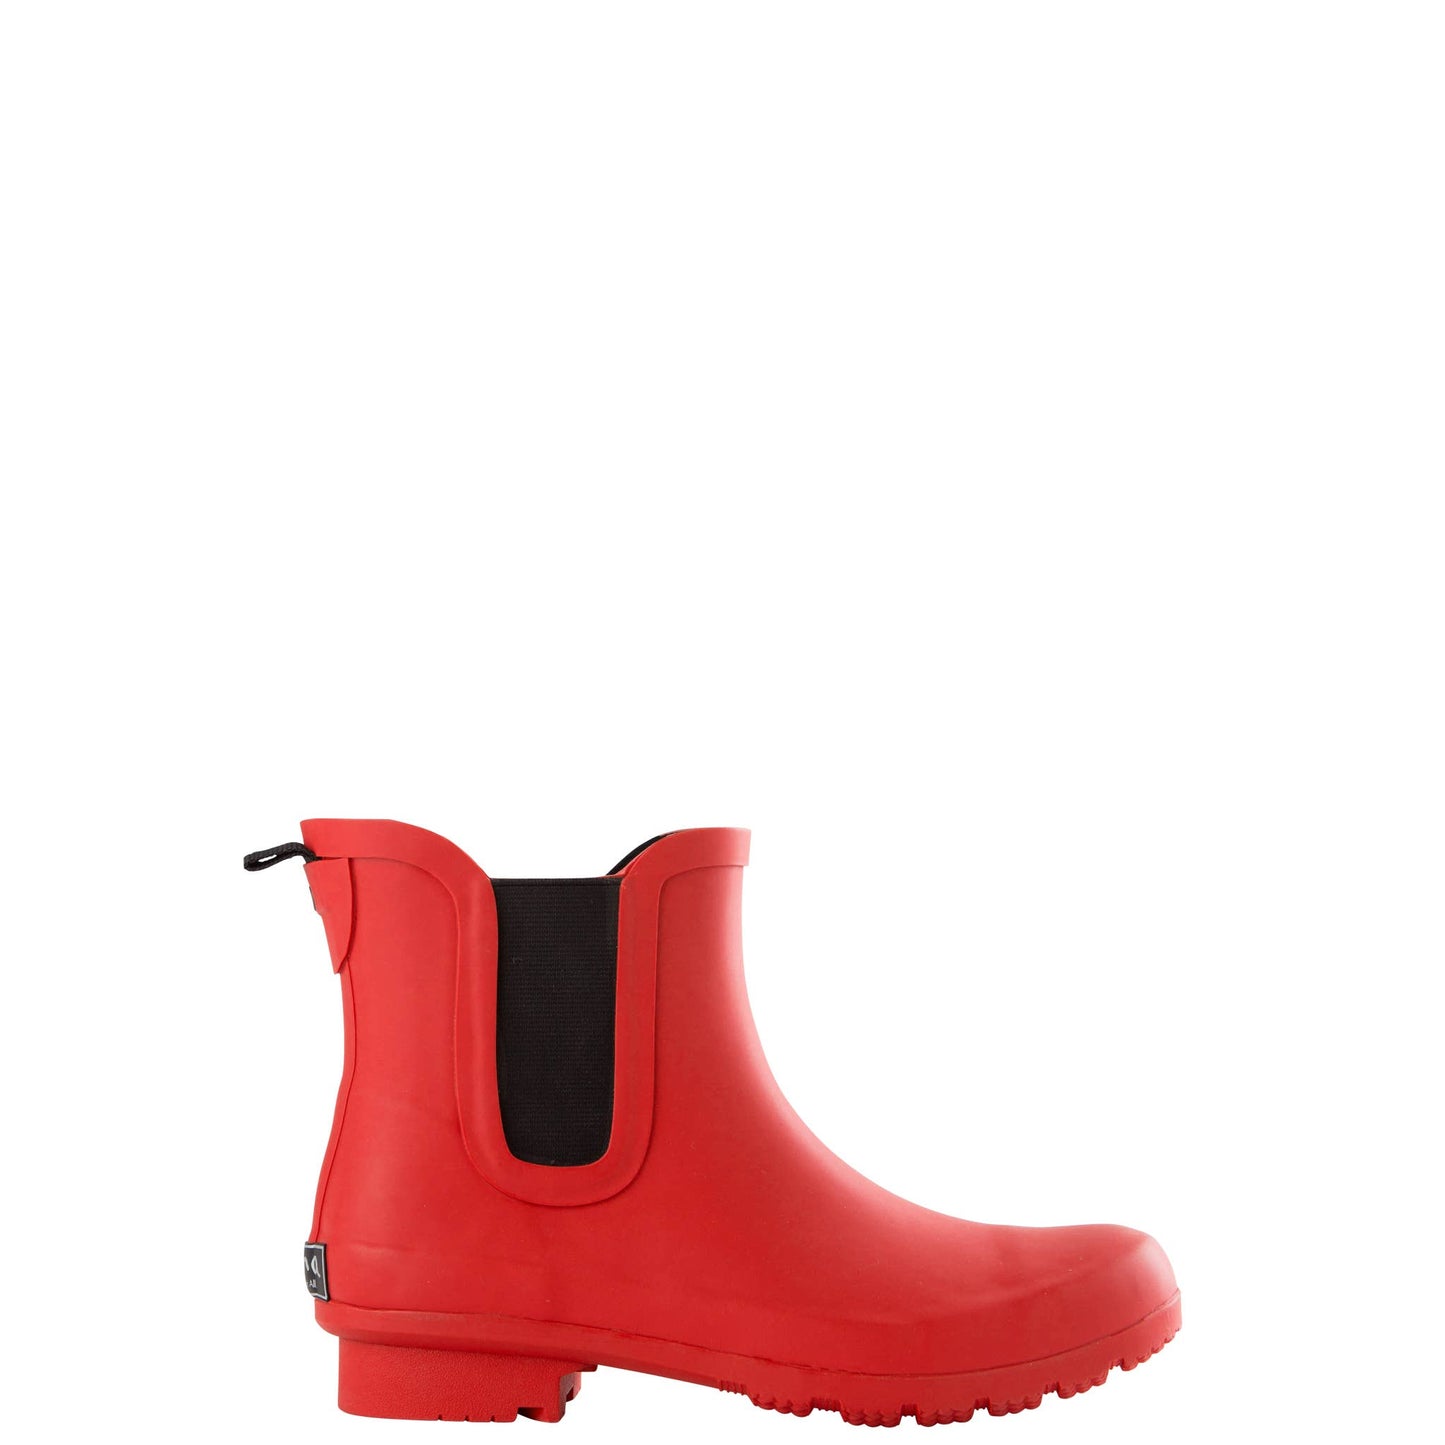 ROMA BOOTS - CHELSEA MATTE RED WOMEN'S ANKLE RAIN BOOTS